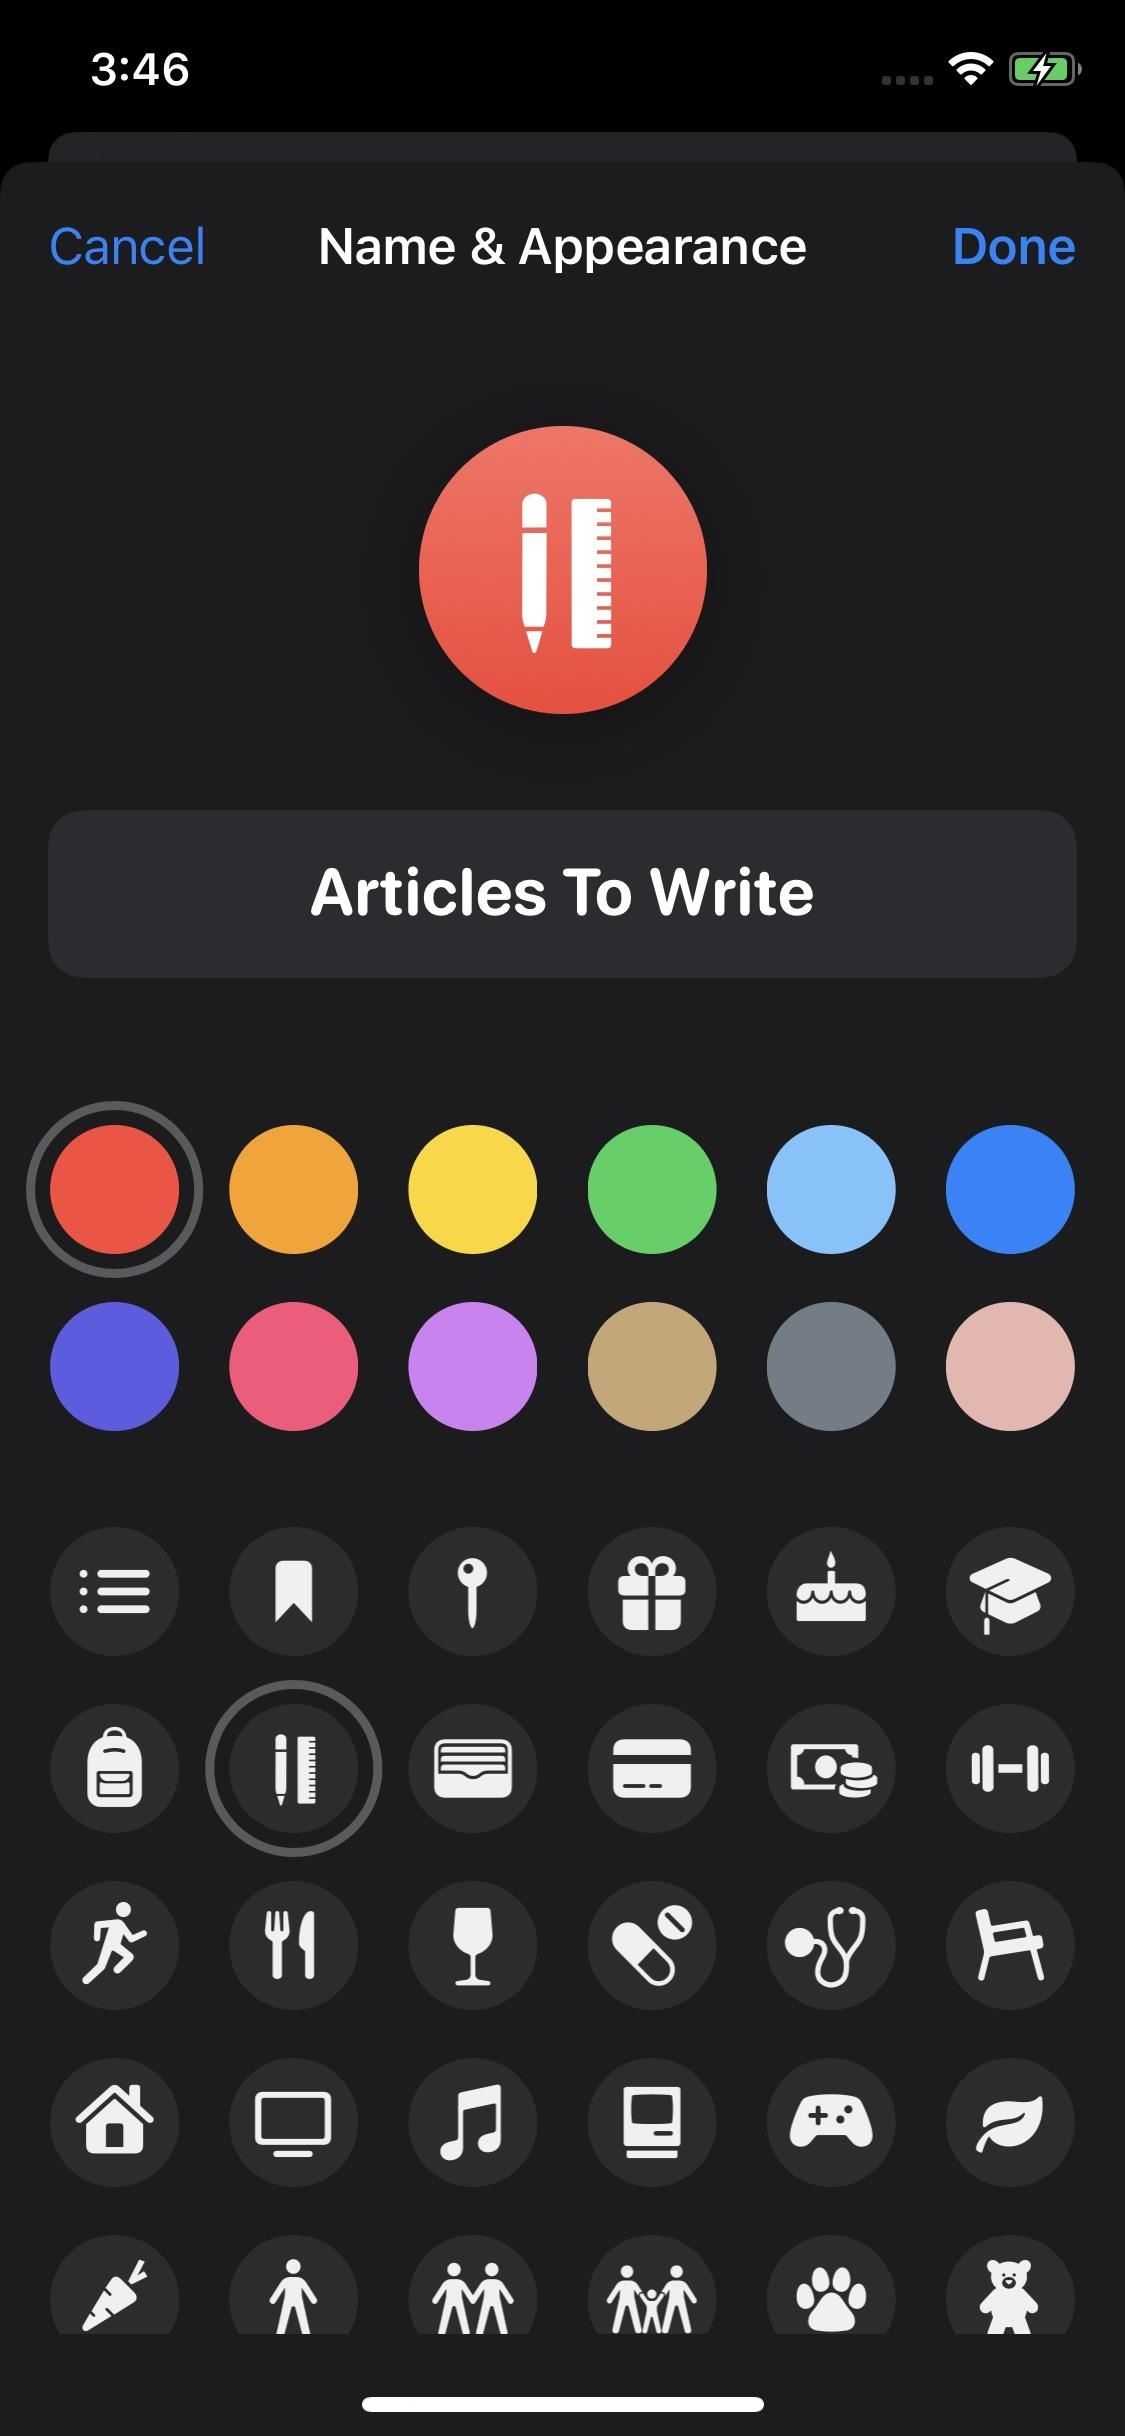 How to Change List Colors & Icons in iOS 13's Reminders App for a More Customized Look